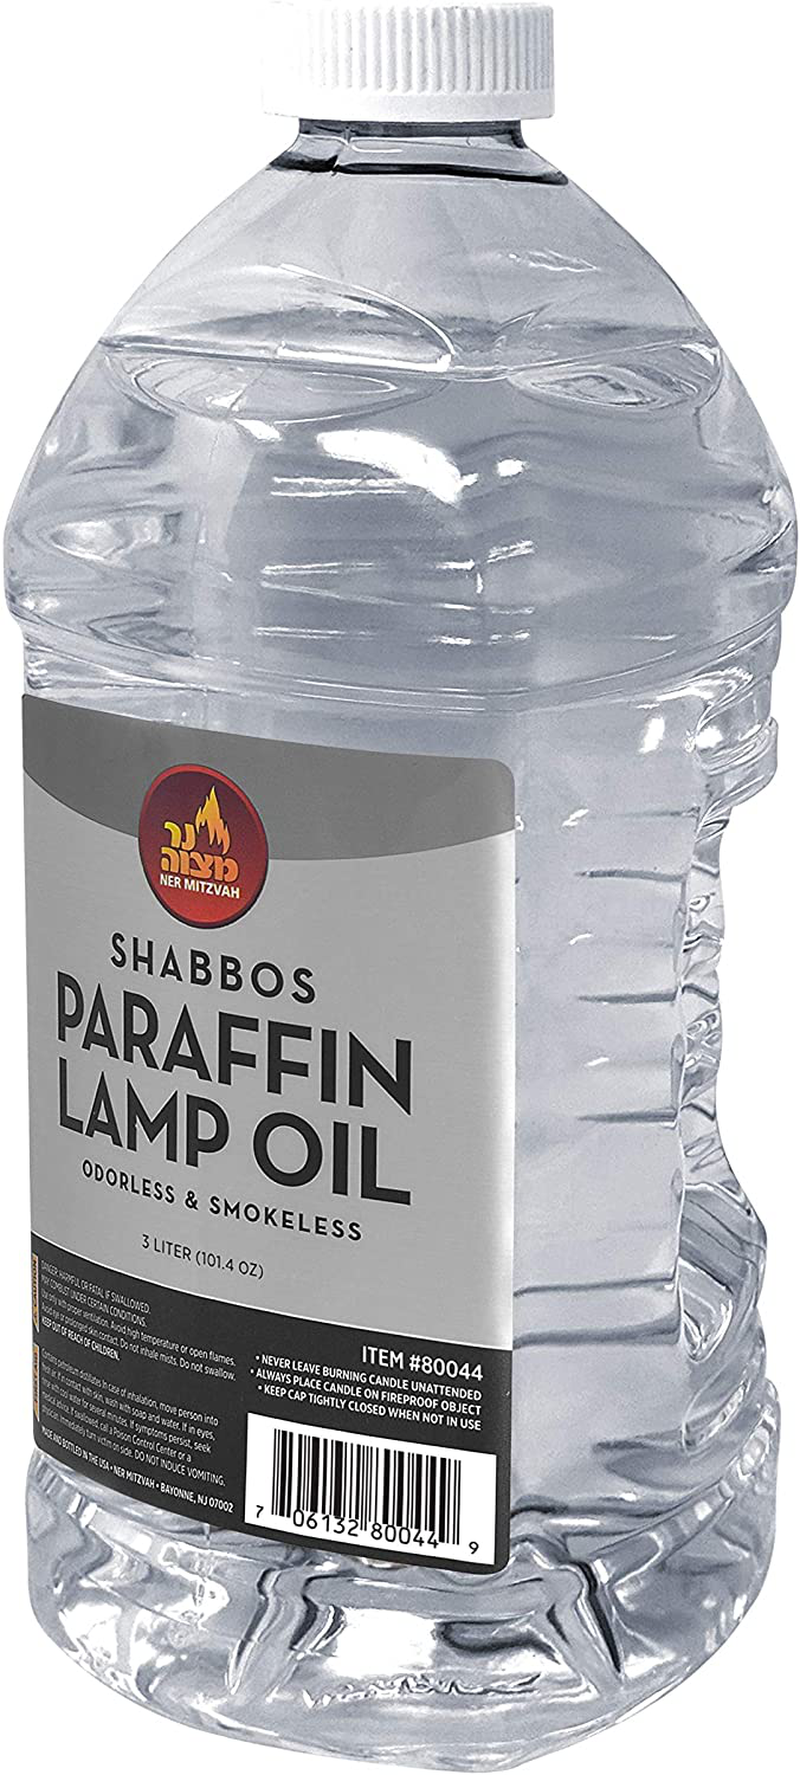 Ner Mitzvah Paraffin Lamp Oil - 3 Liter - Clear Smokeless, Odorless, Clean Burning Fuel for Indoor and Outdoor Use - (101.4 oz) Home & Garden > Lighting Accessories > Oil Lamp Fuel Ner Mitzvah Default Title  